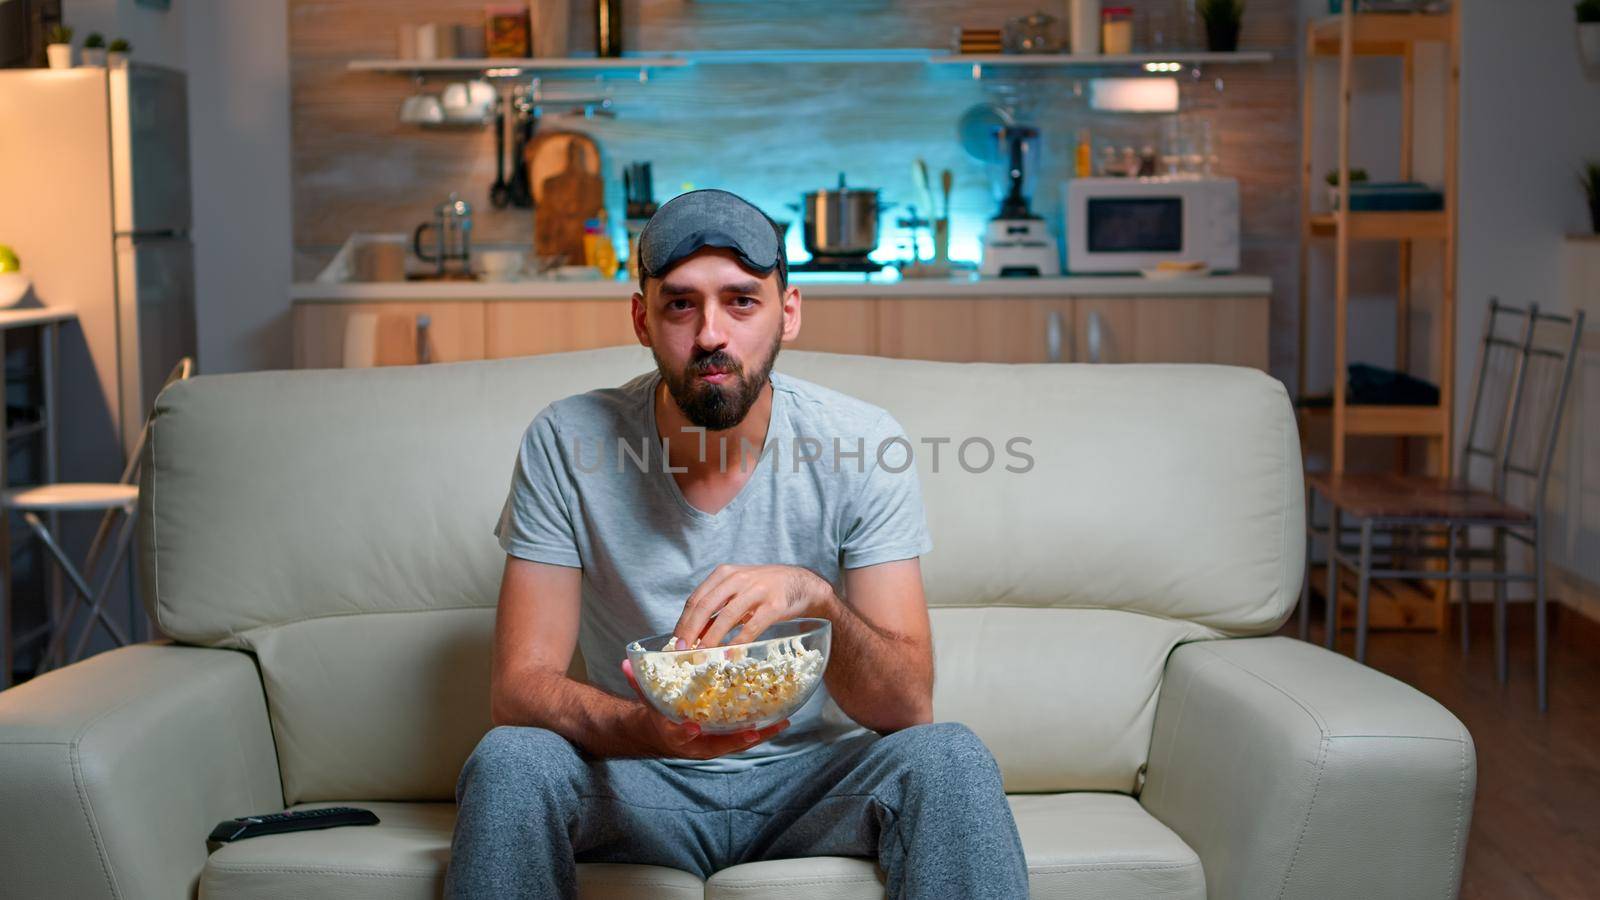 Portrait of man with beard holding popcorn bowl while watching entertainment movie on television. Concentrated person with eye sleep mask sitting on sofa late at night in kitchen